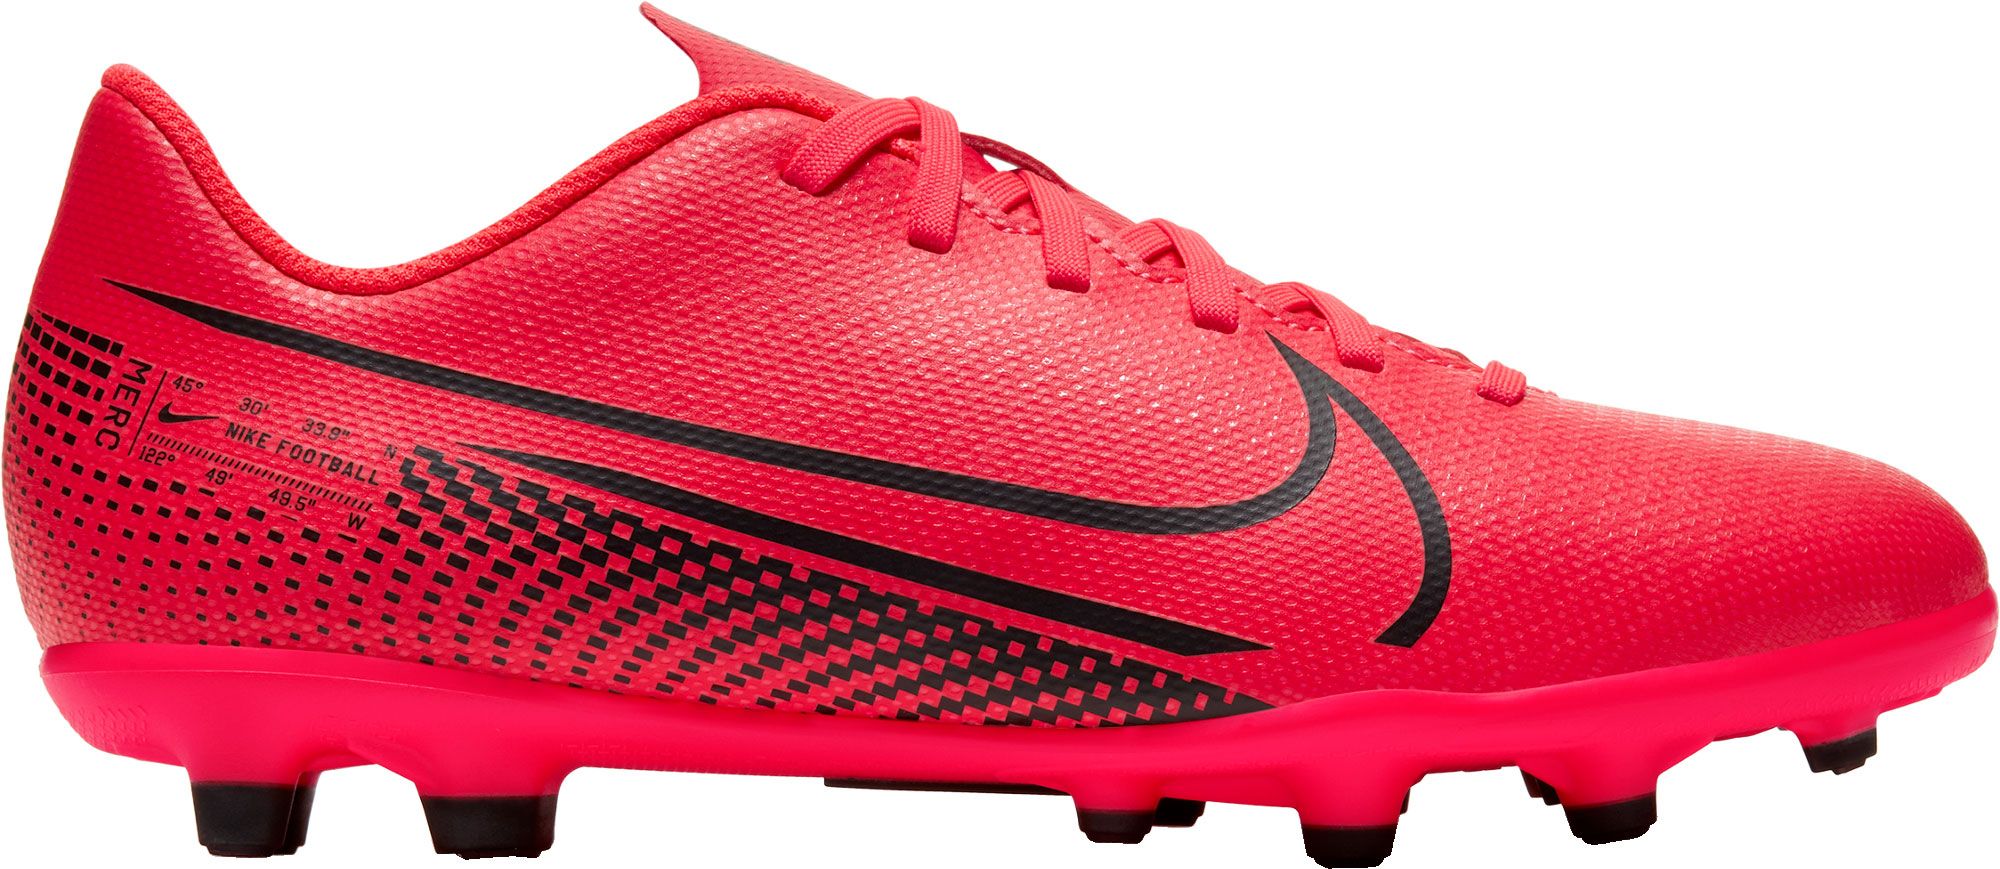 Girls' Soccer Cleats | Best Price 